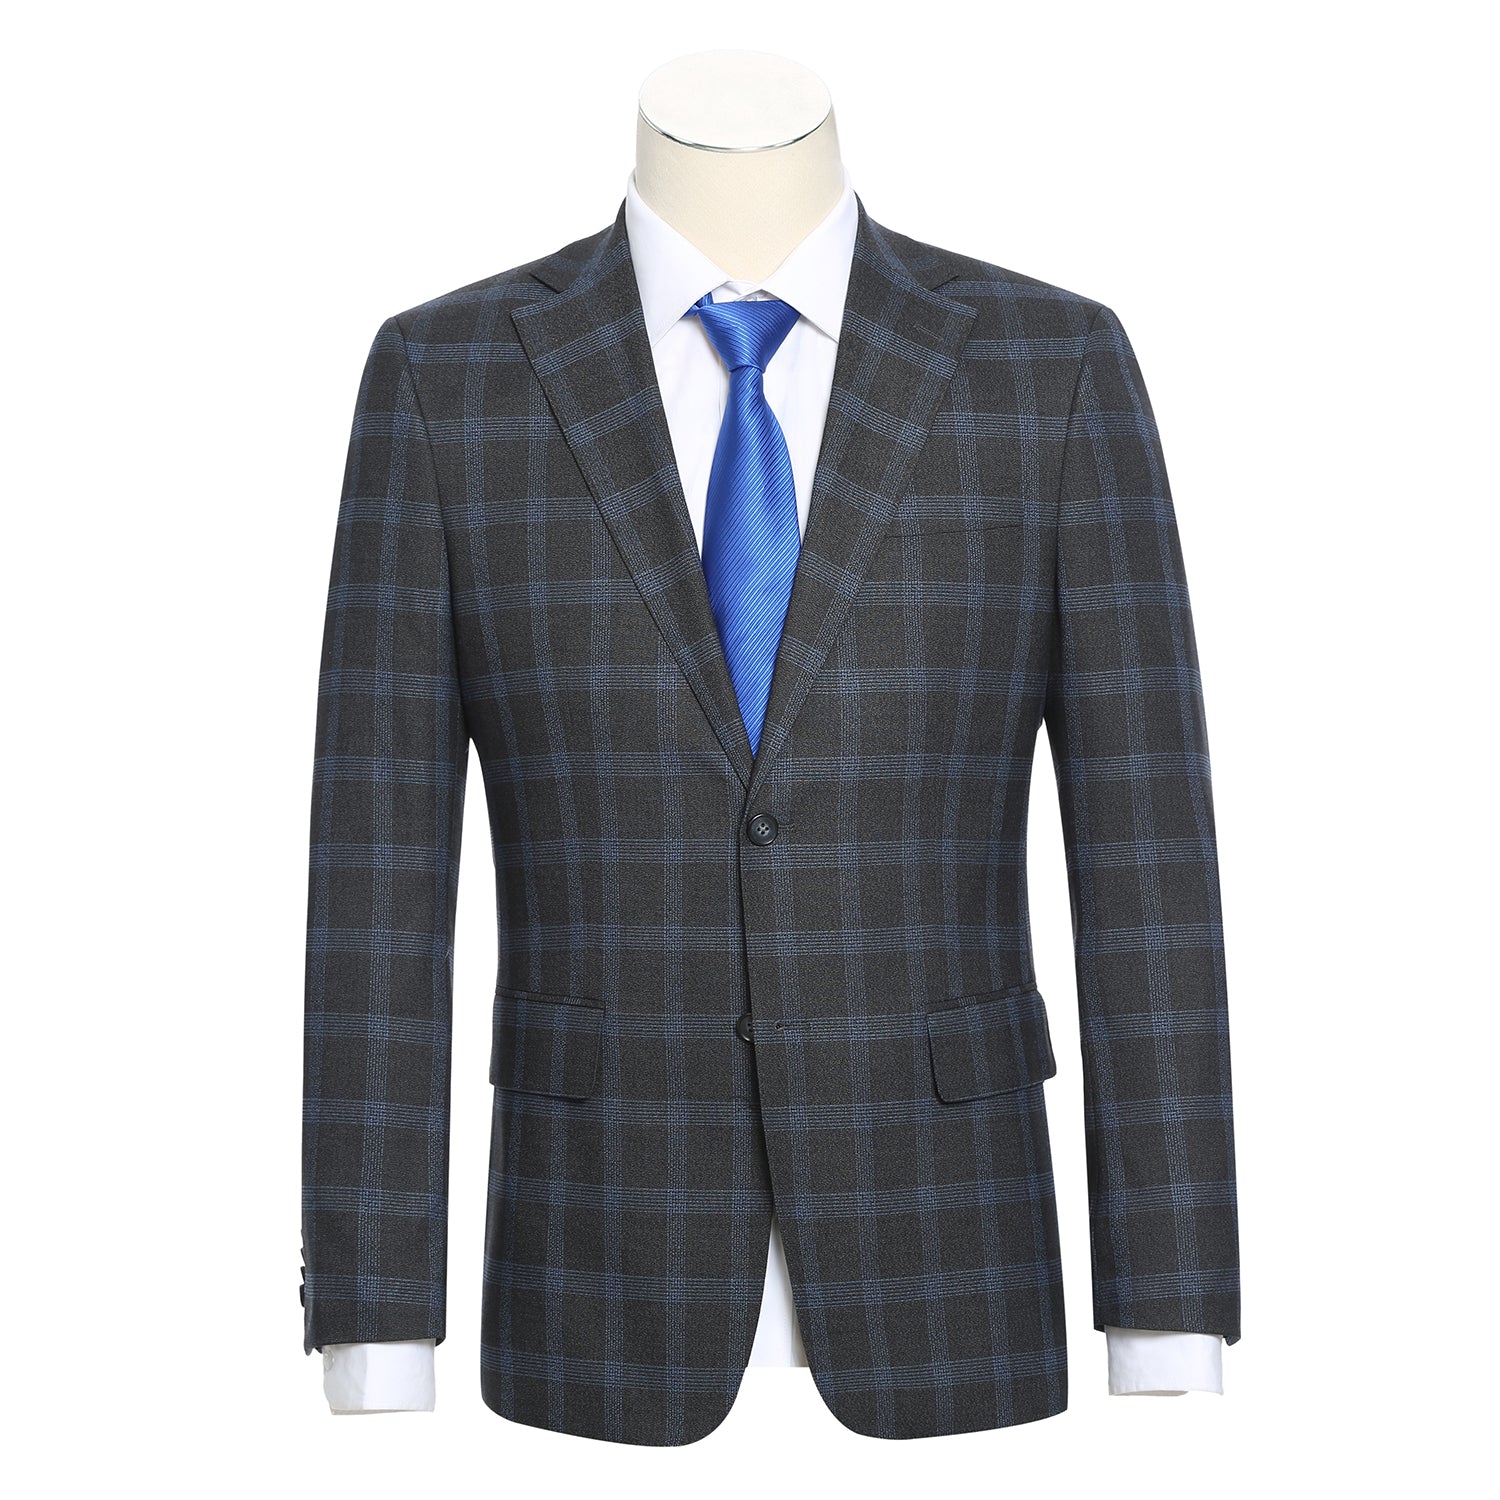 English Laundry Charcoal with Blue Check Notch Suit